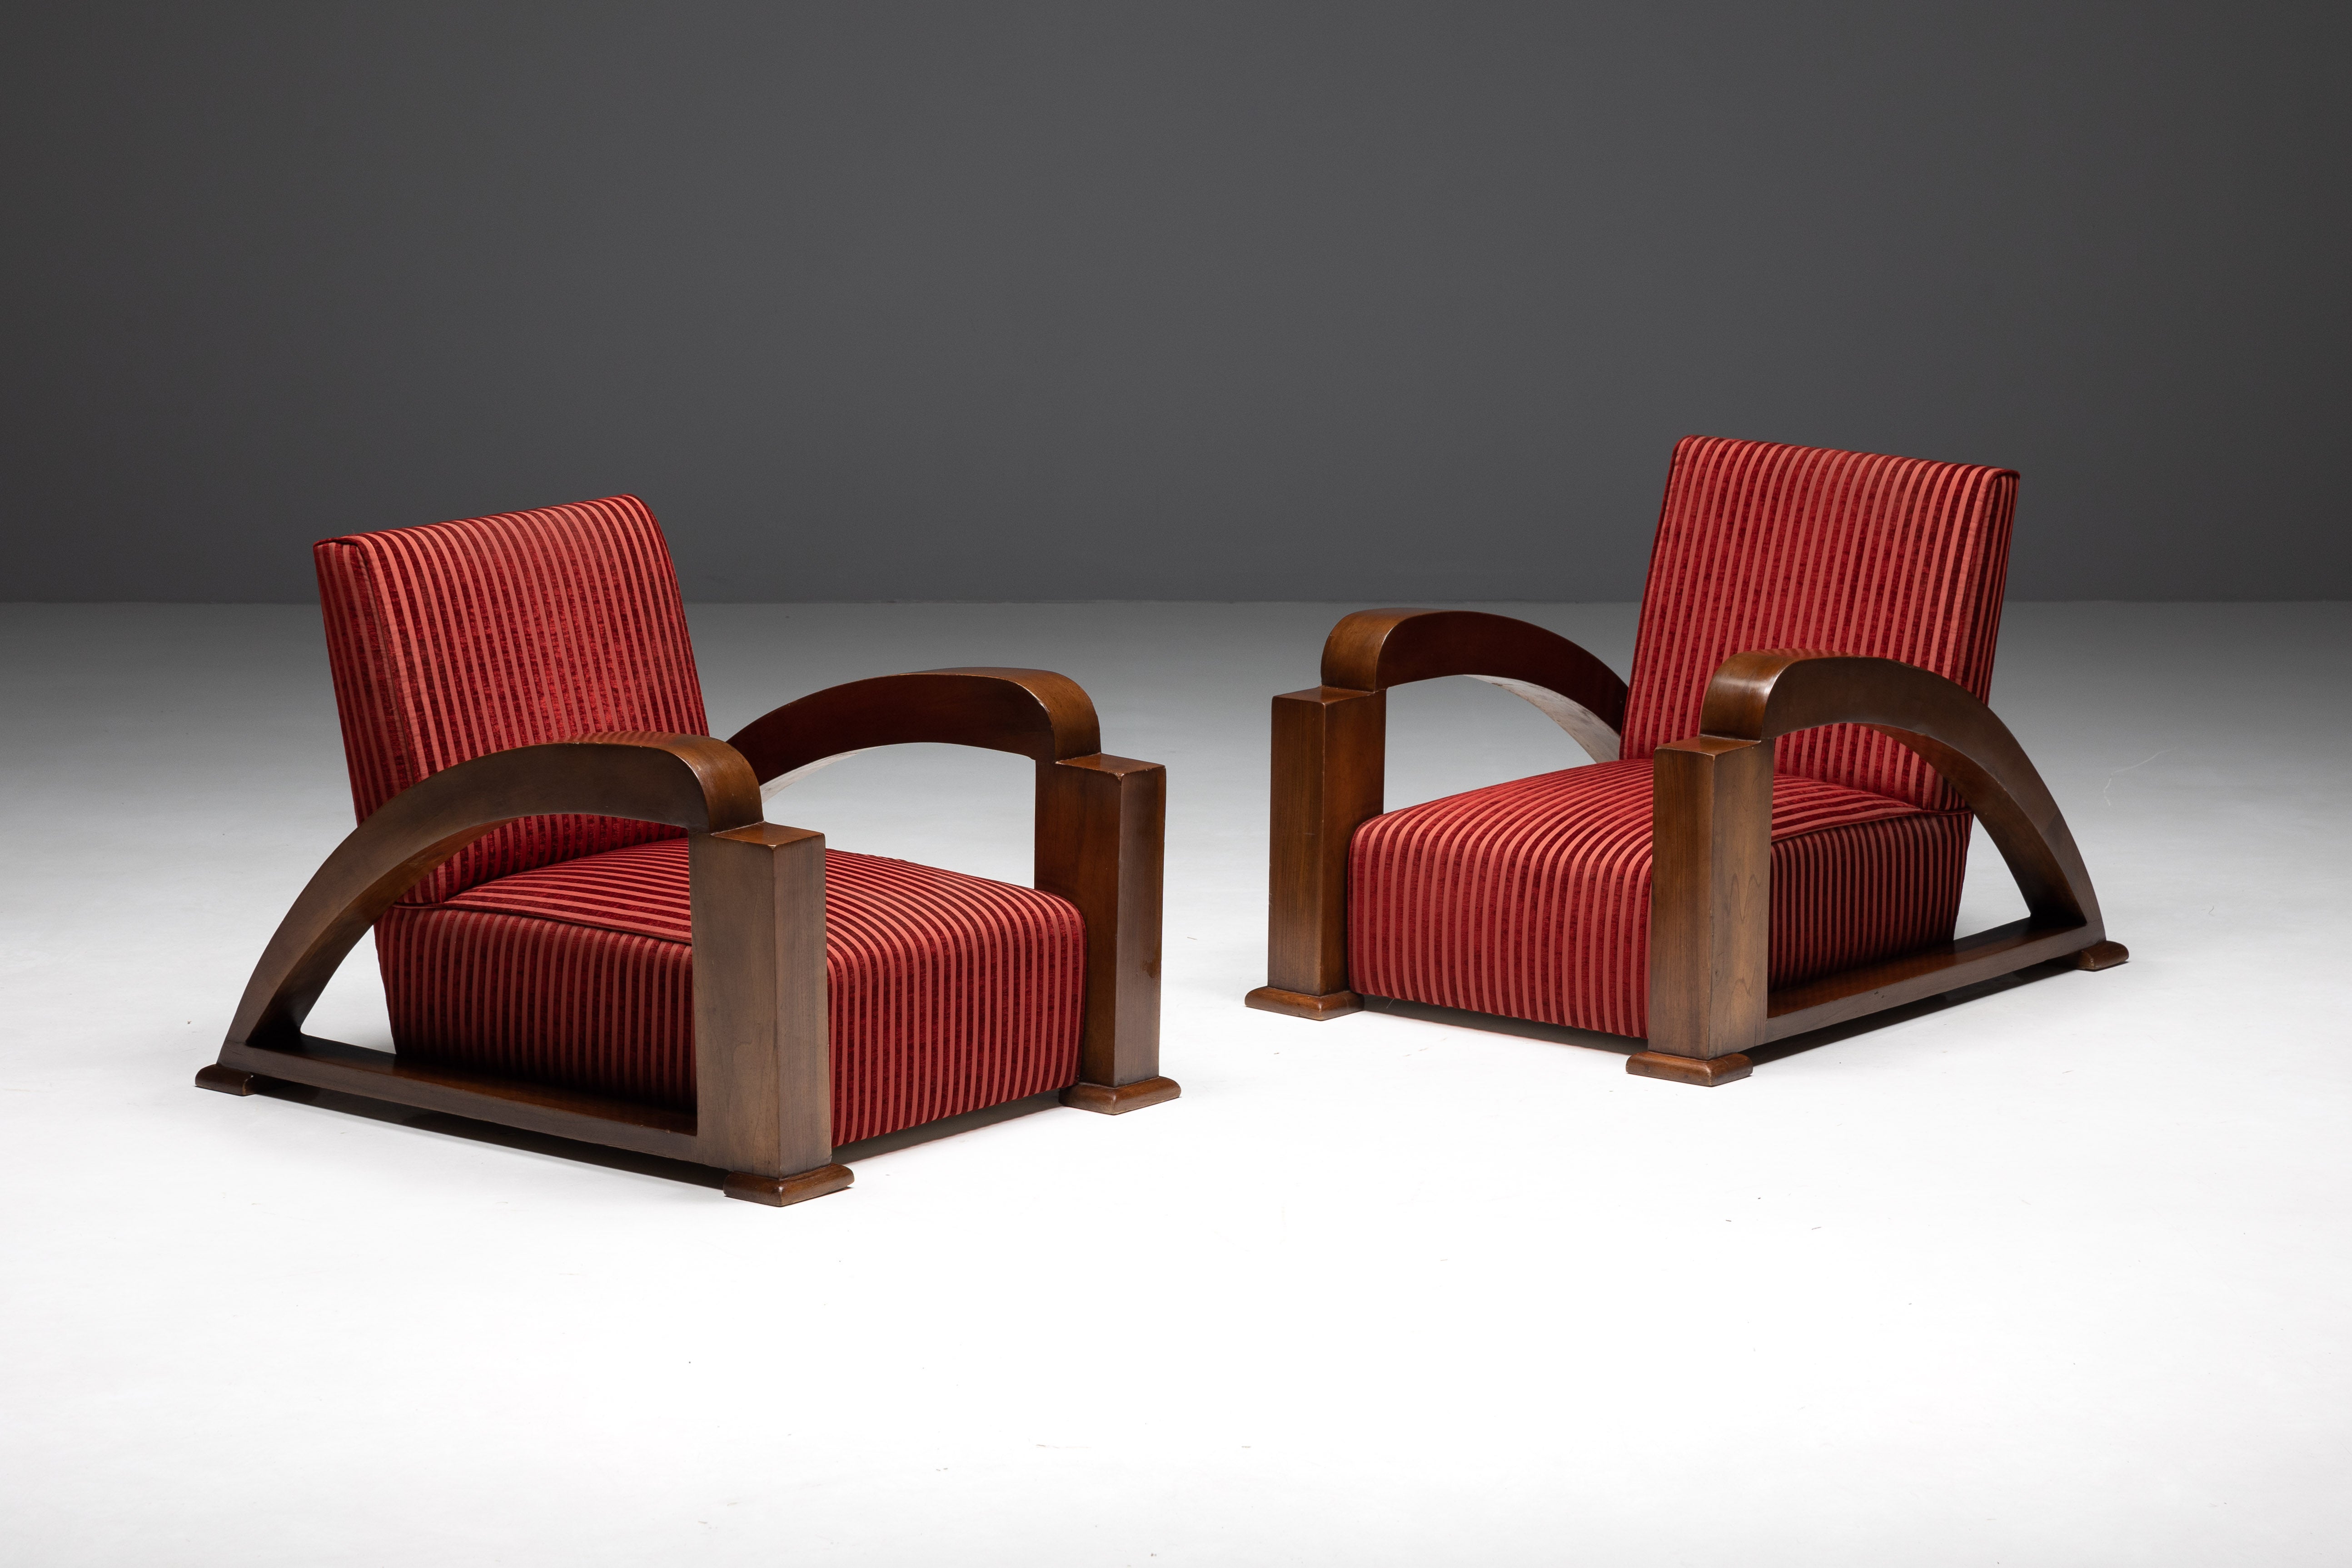 Art Deco Armchairs in Red Striped Velvet and with Swoosh Armrests, France, 1940s For Sale